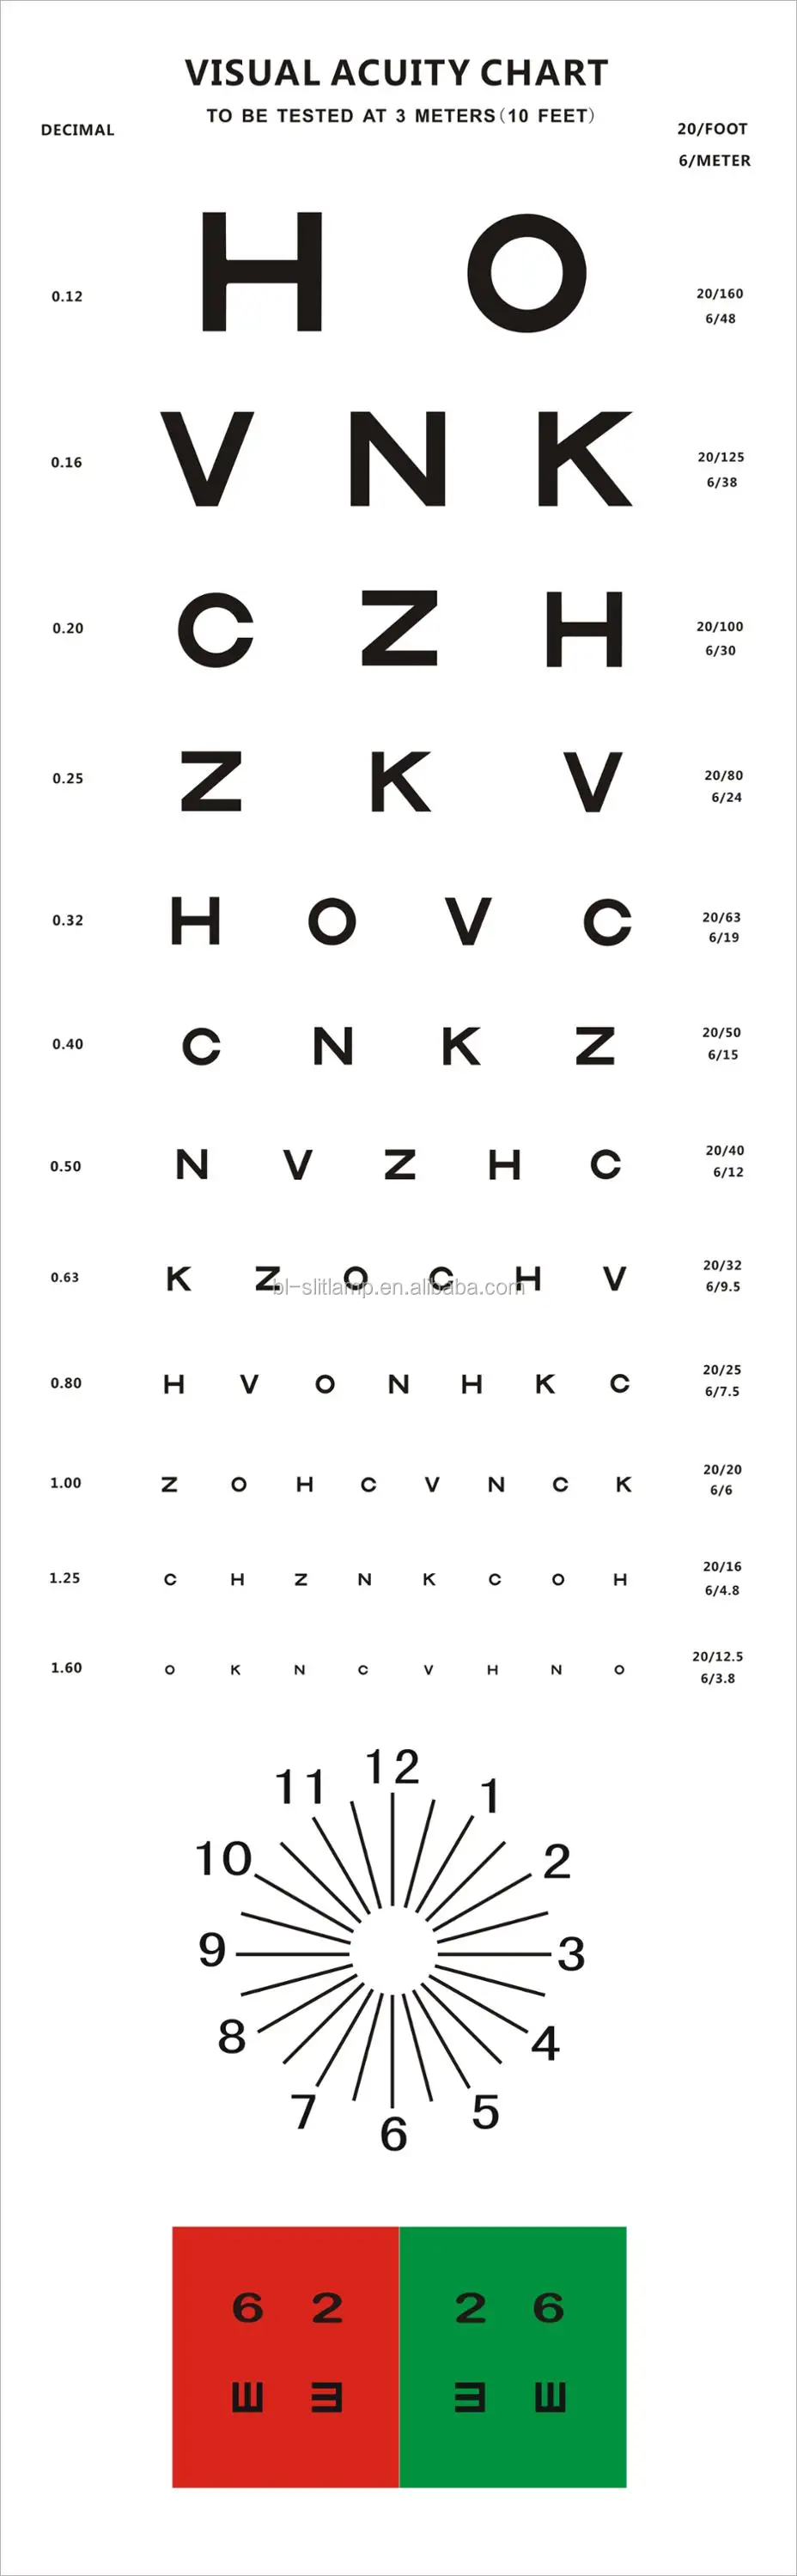 20 40 Vision Test Chart